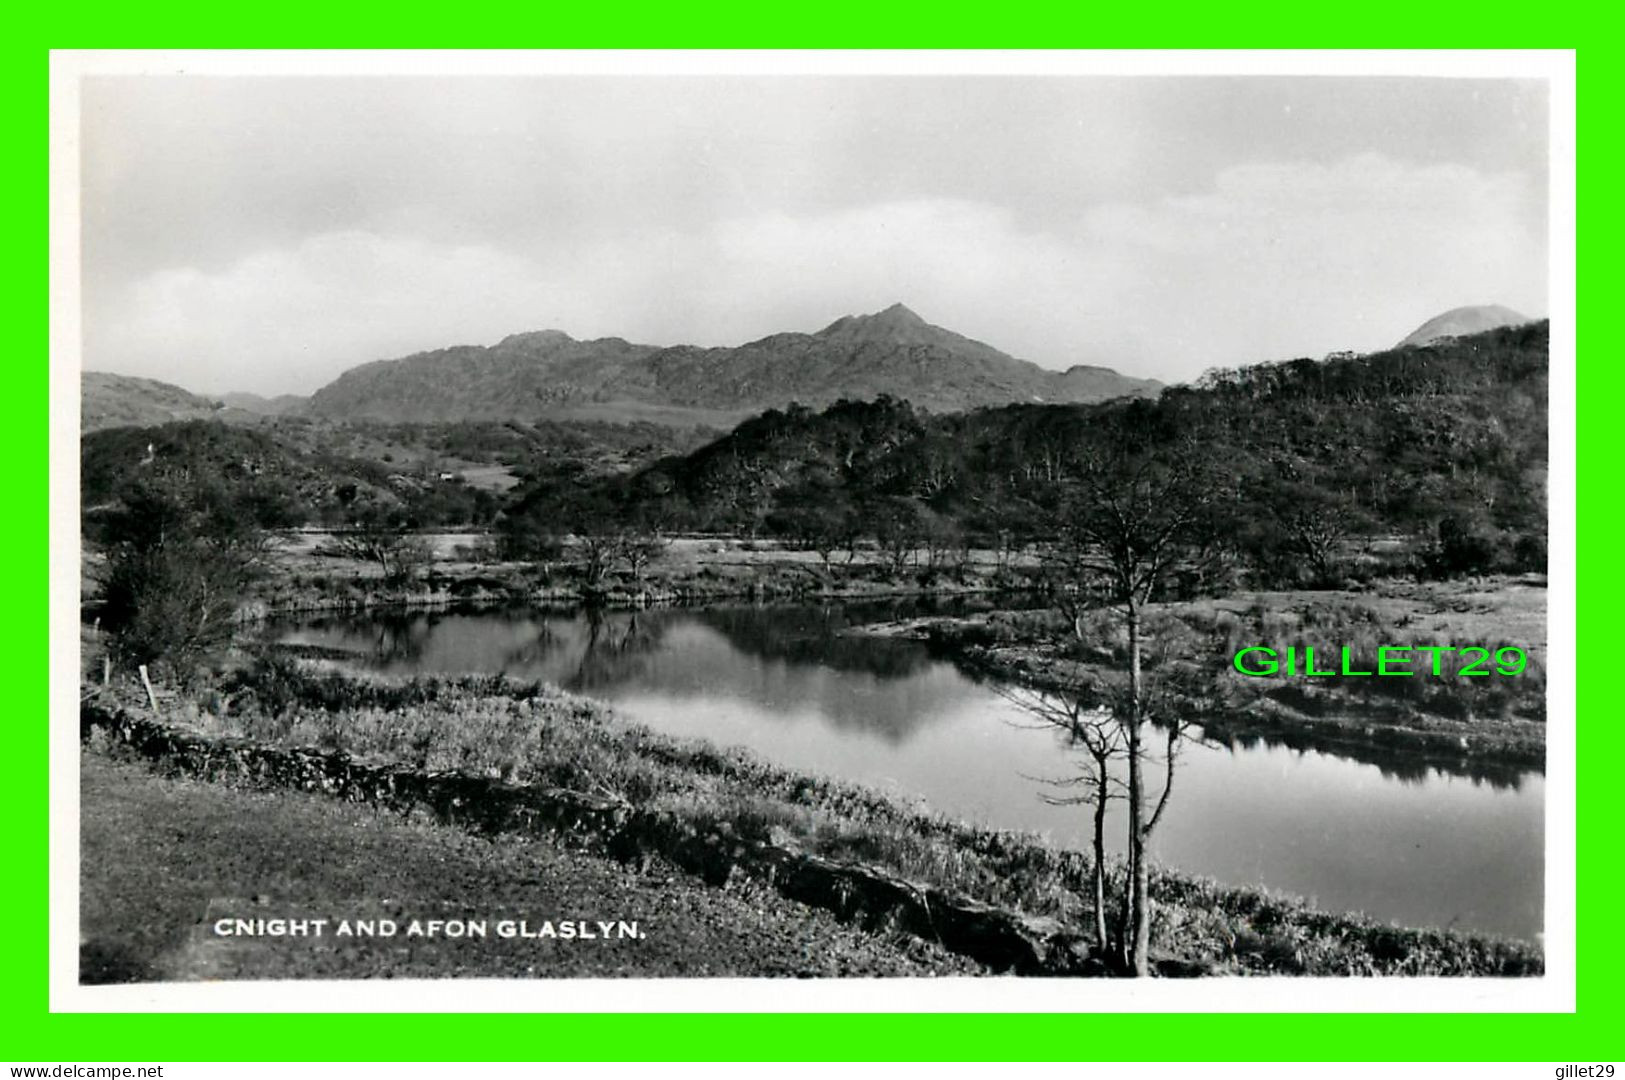 GLASLYN, PAYS DE GALLES - CNIGHT AND AFON -  REAL PHOTOGRAPH - T. A. MORRIS - - Caernarvonshire